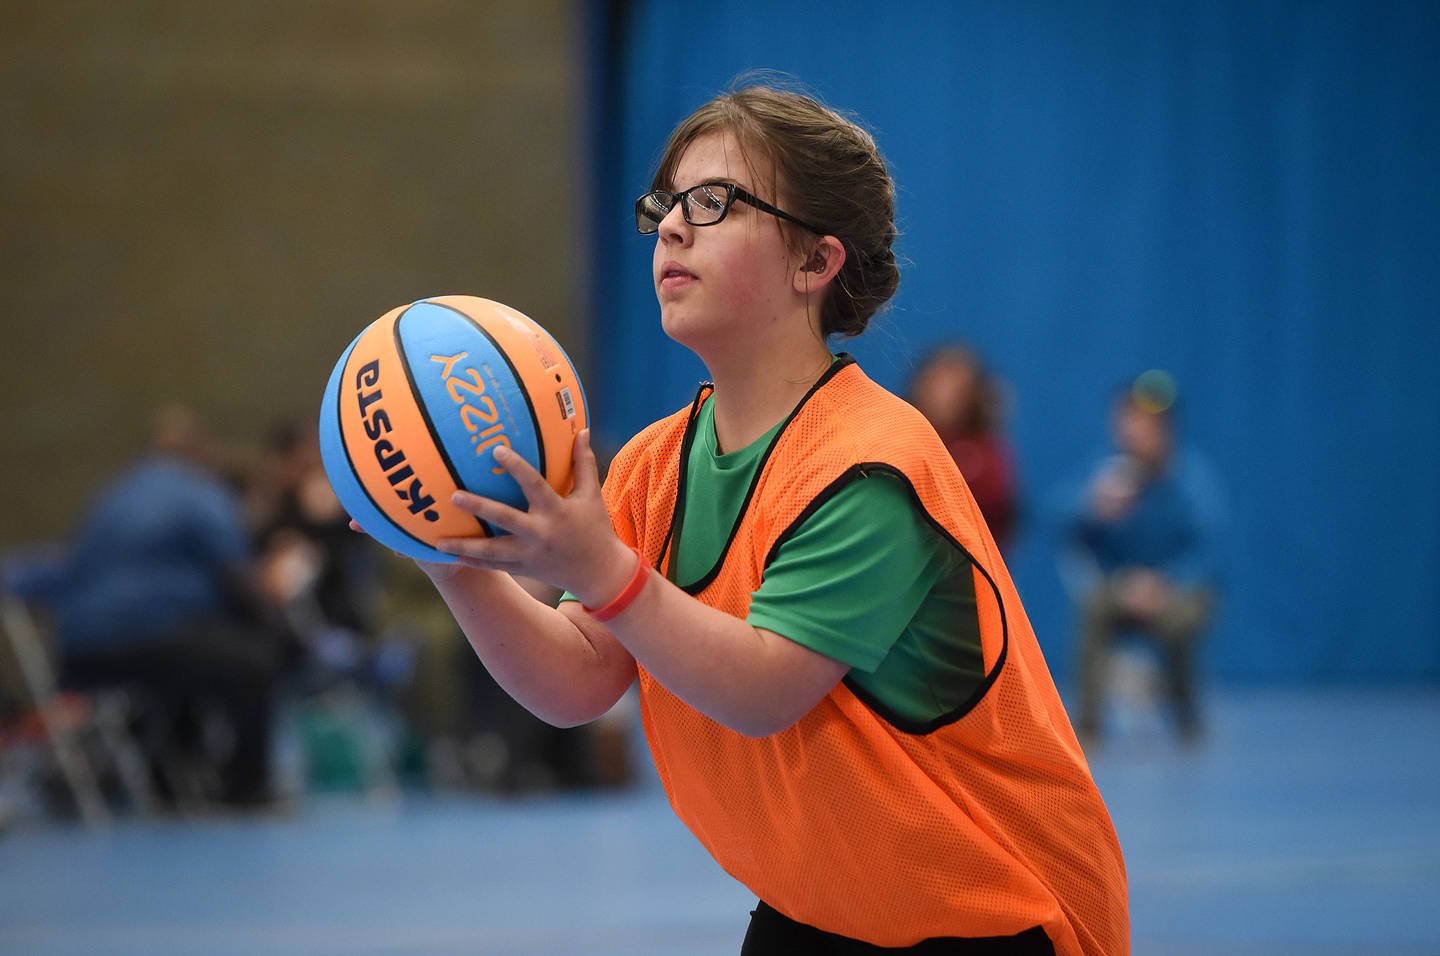 Young woman with dwarfism and hearing impairment playing basketball 